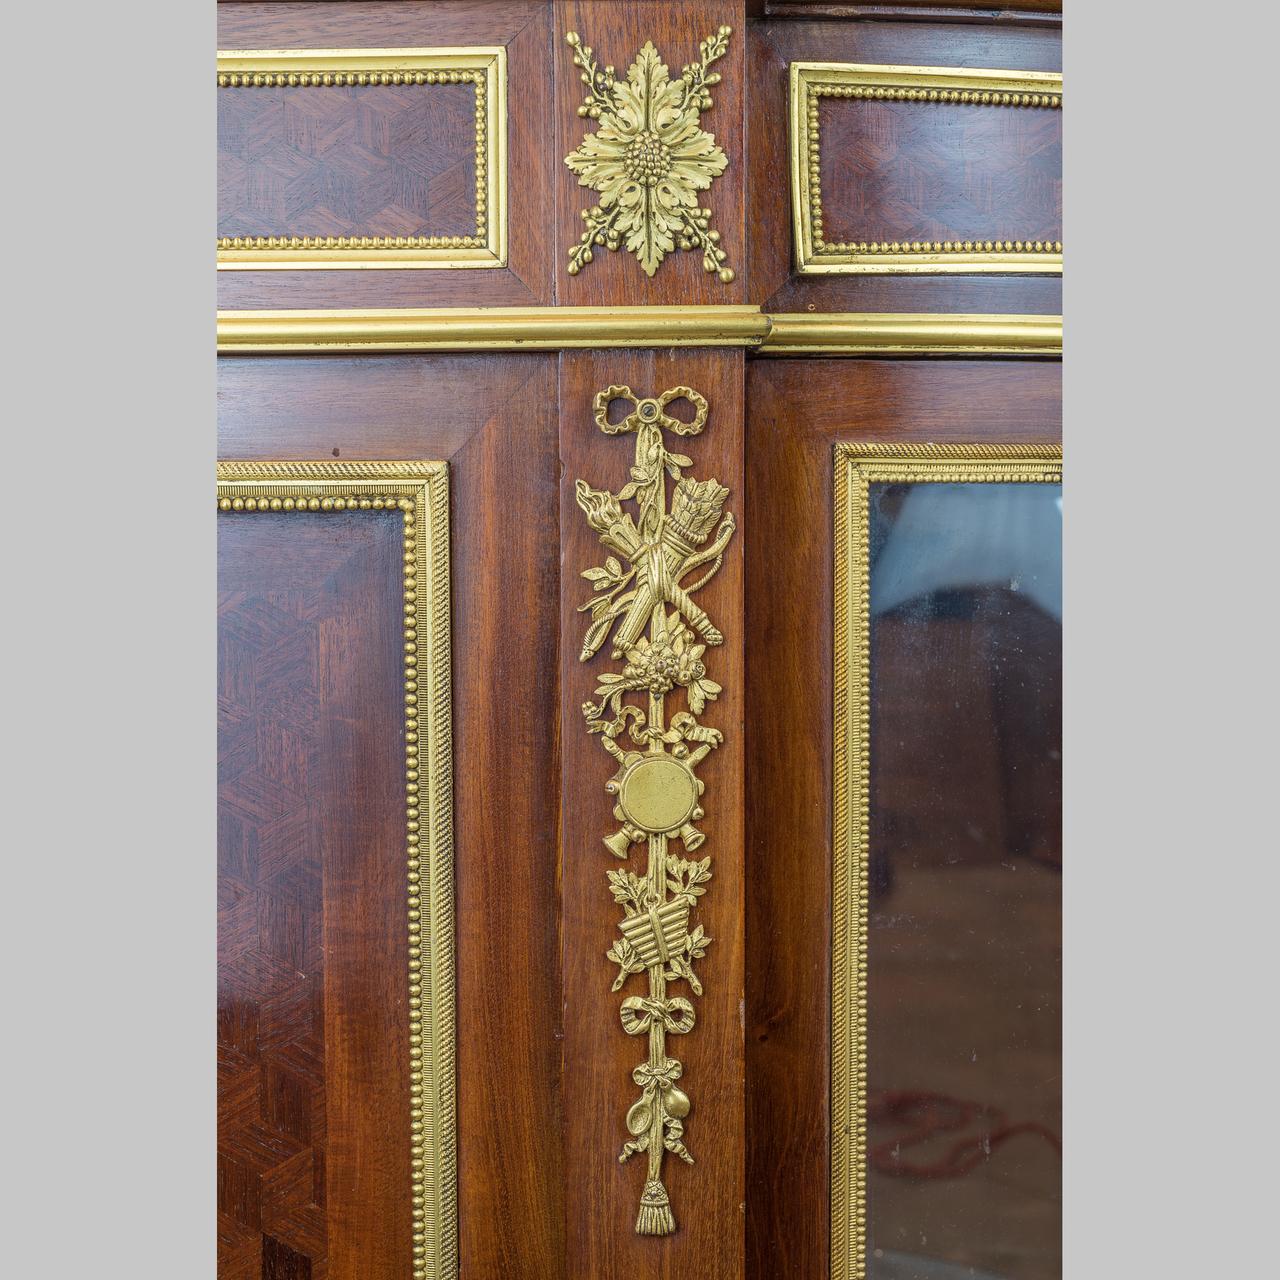 19th Century Louis XVI Style Ormolu Mounted Parquetry Meuble d’Appui Cabinet by Paul Sormani For Sale